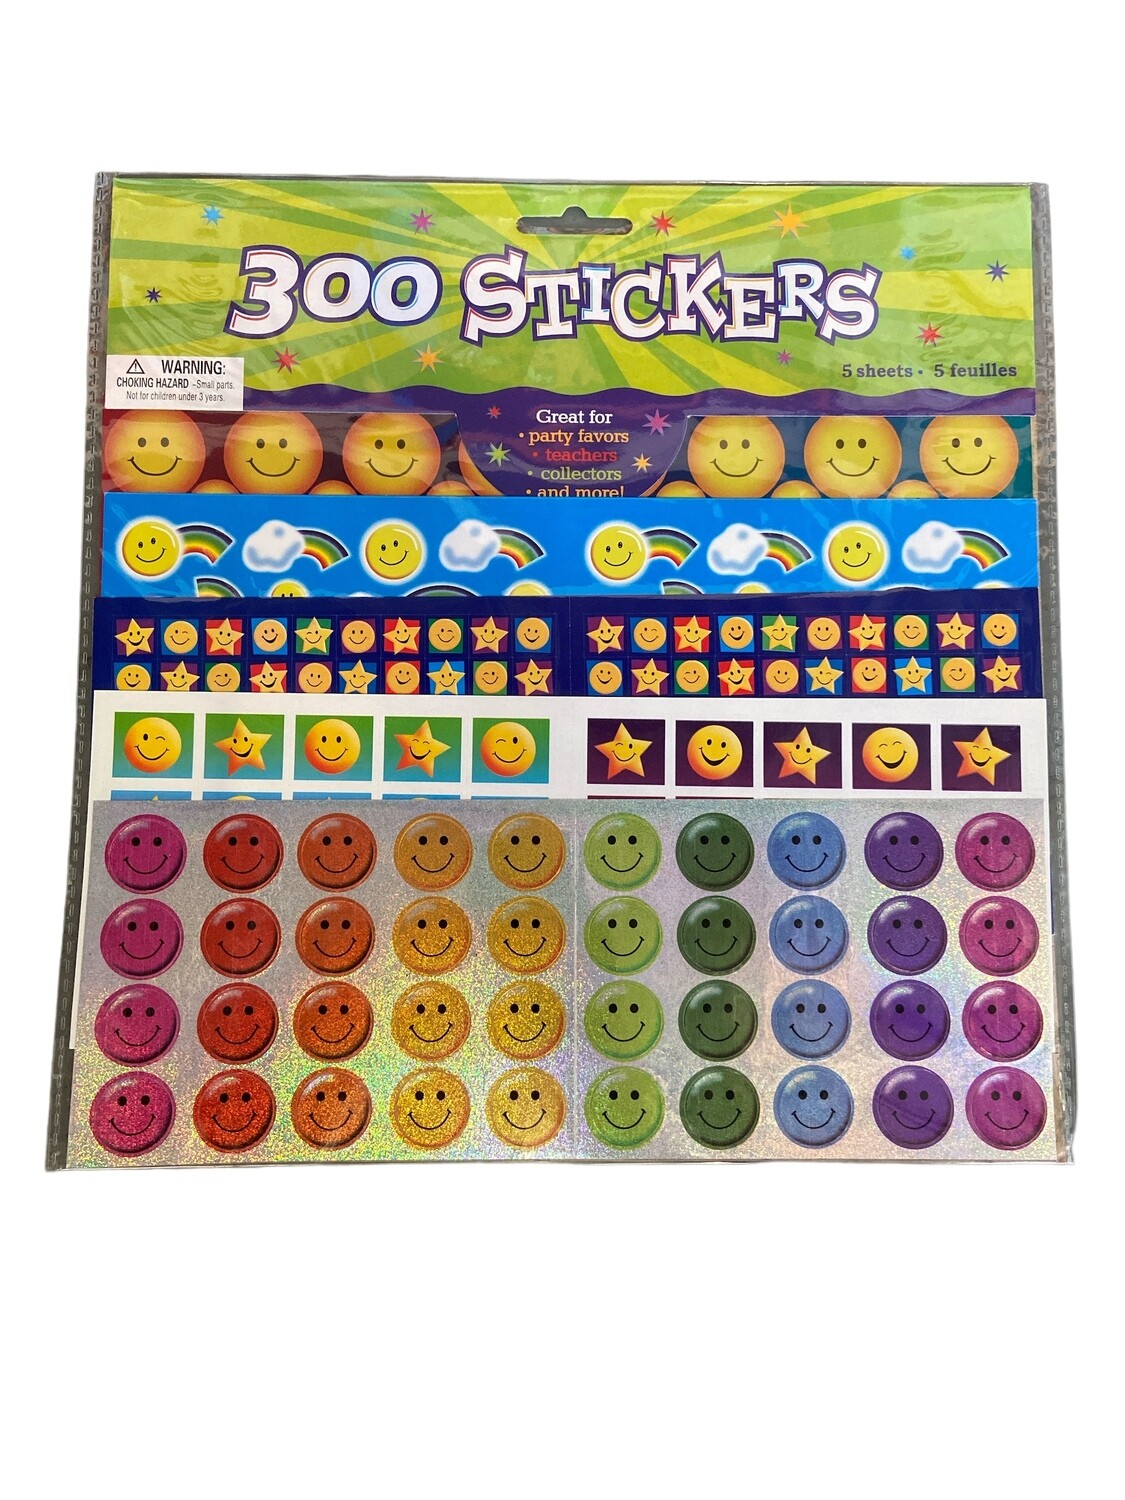 300 STICKERS - SMILIES